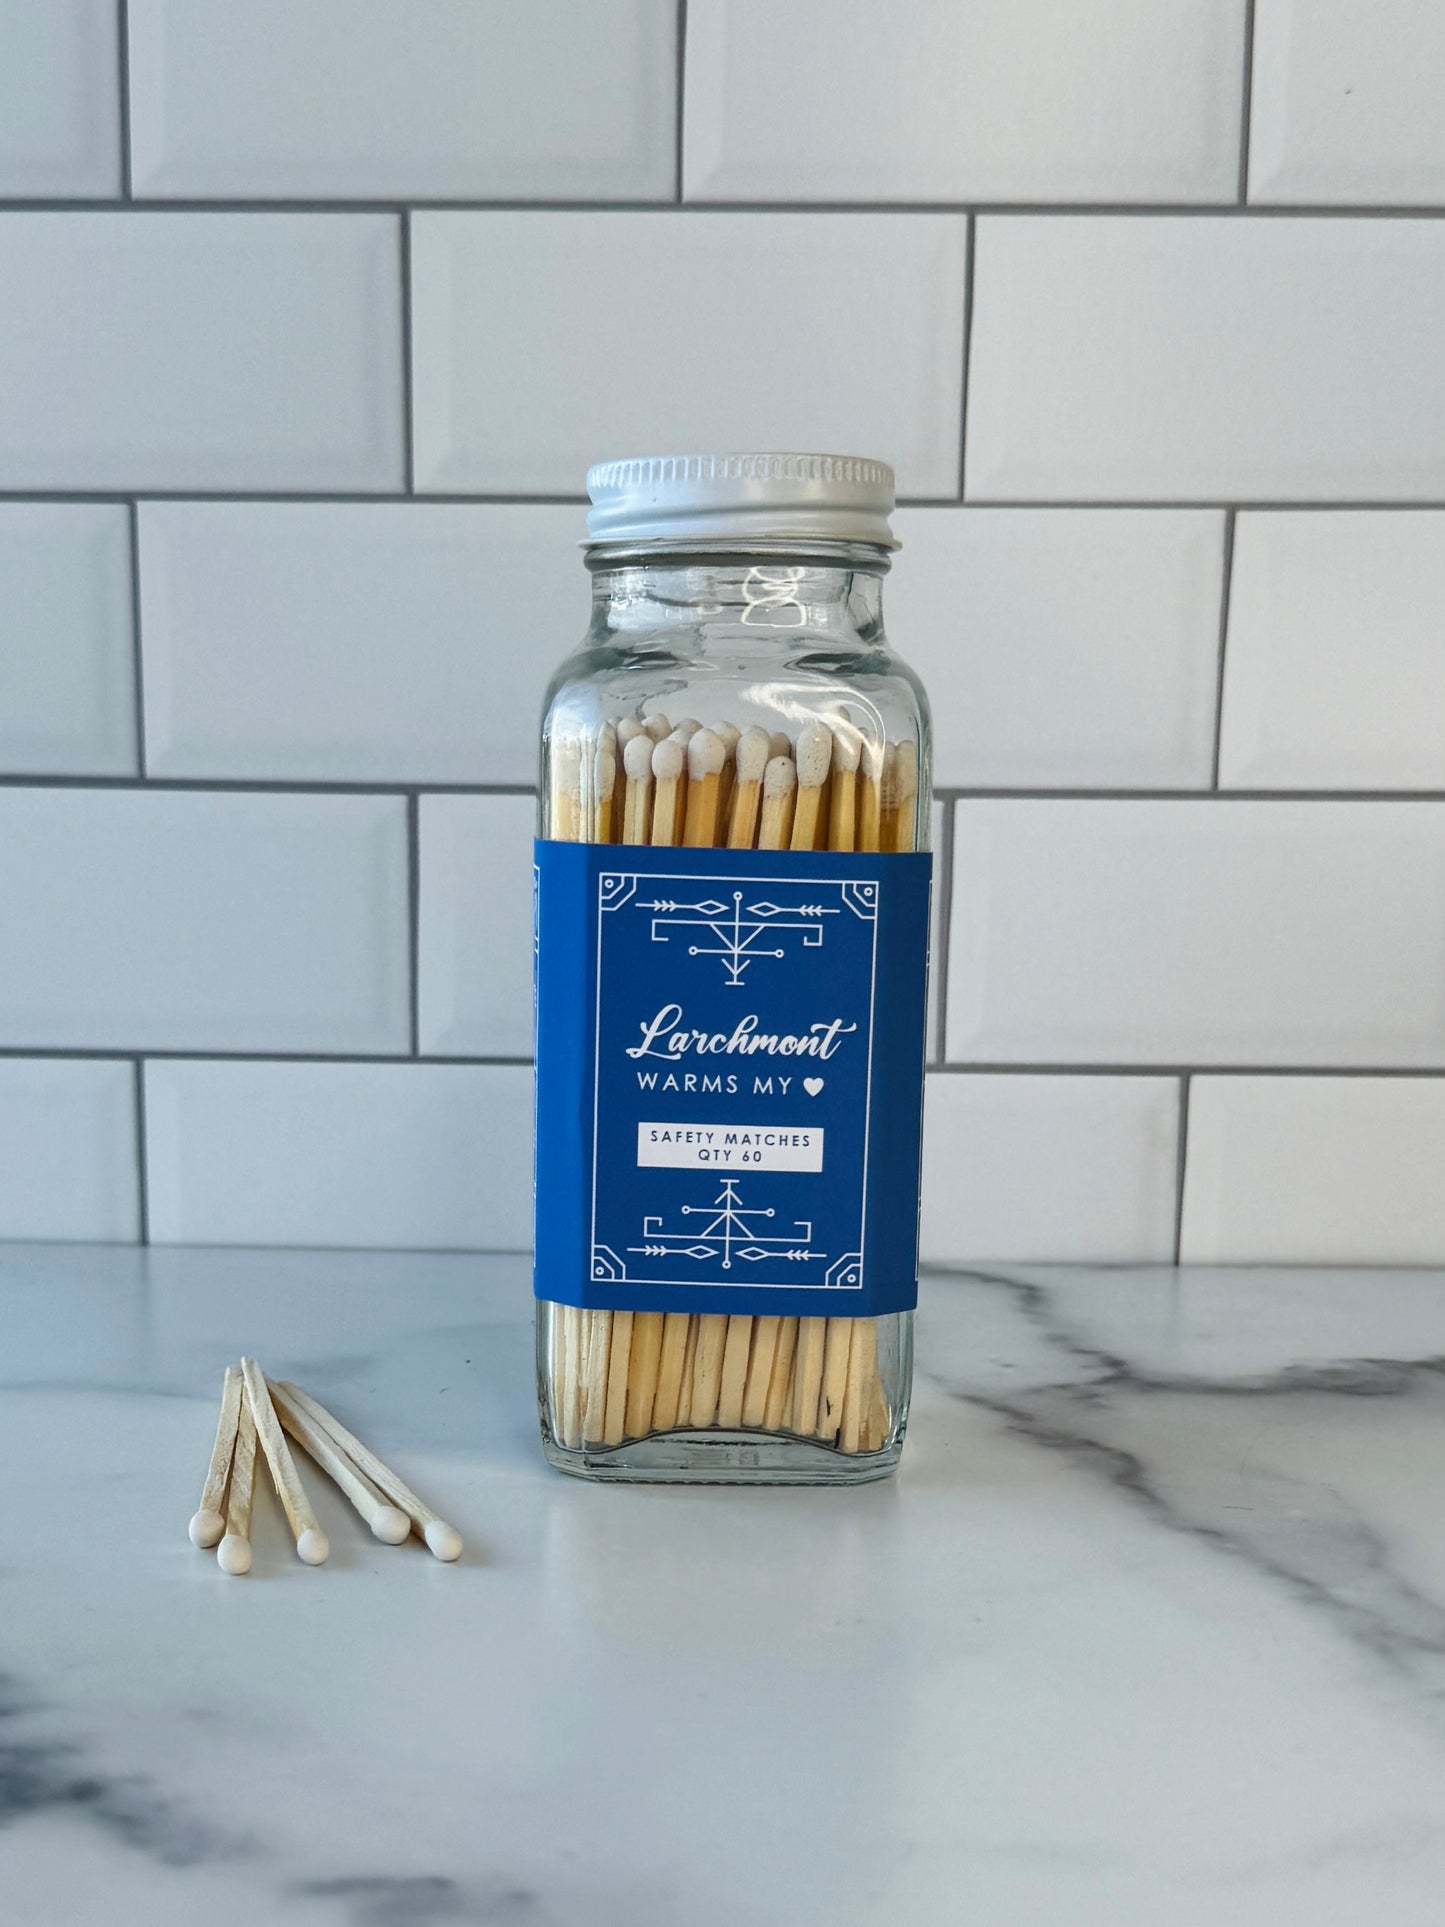 Larchmont Safety Matches - Larchmont Warms My Heart